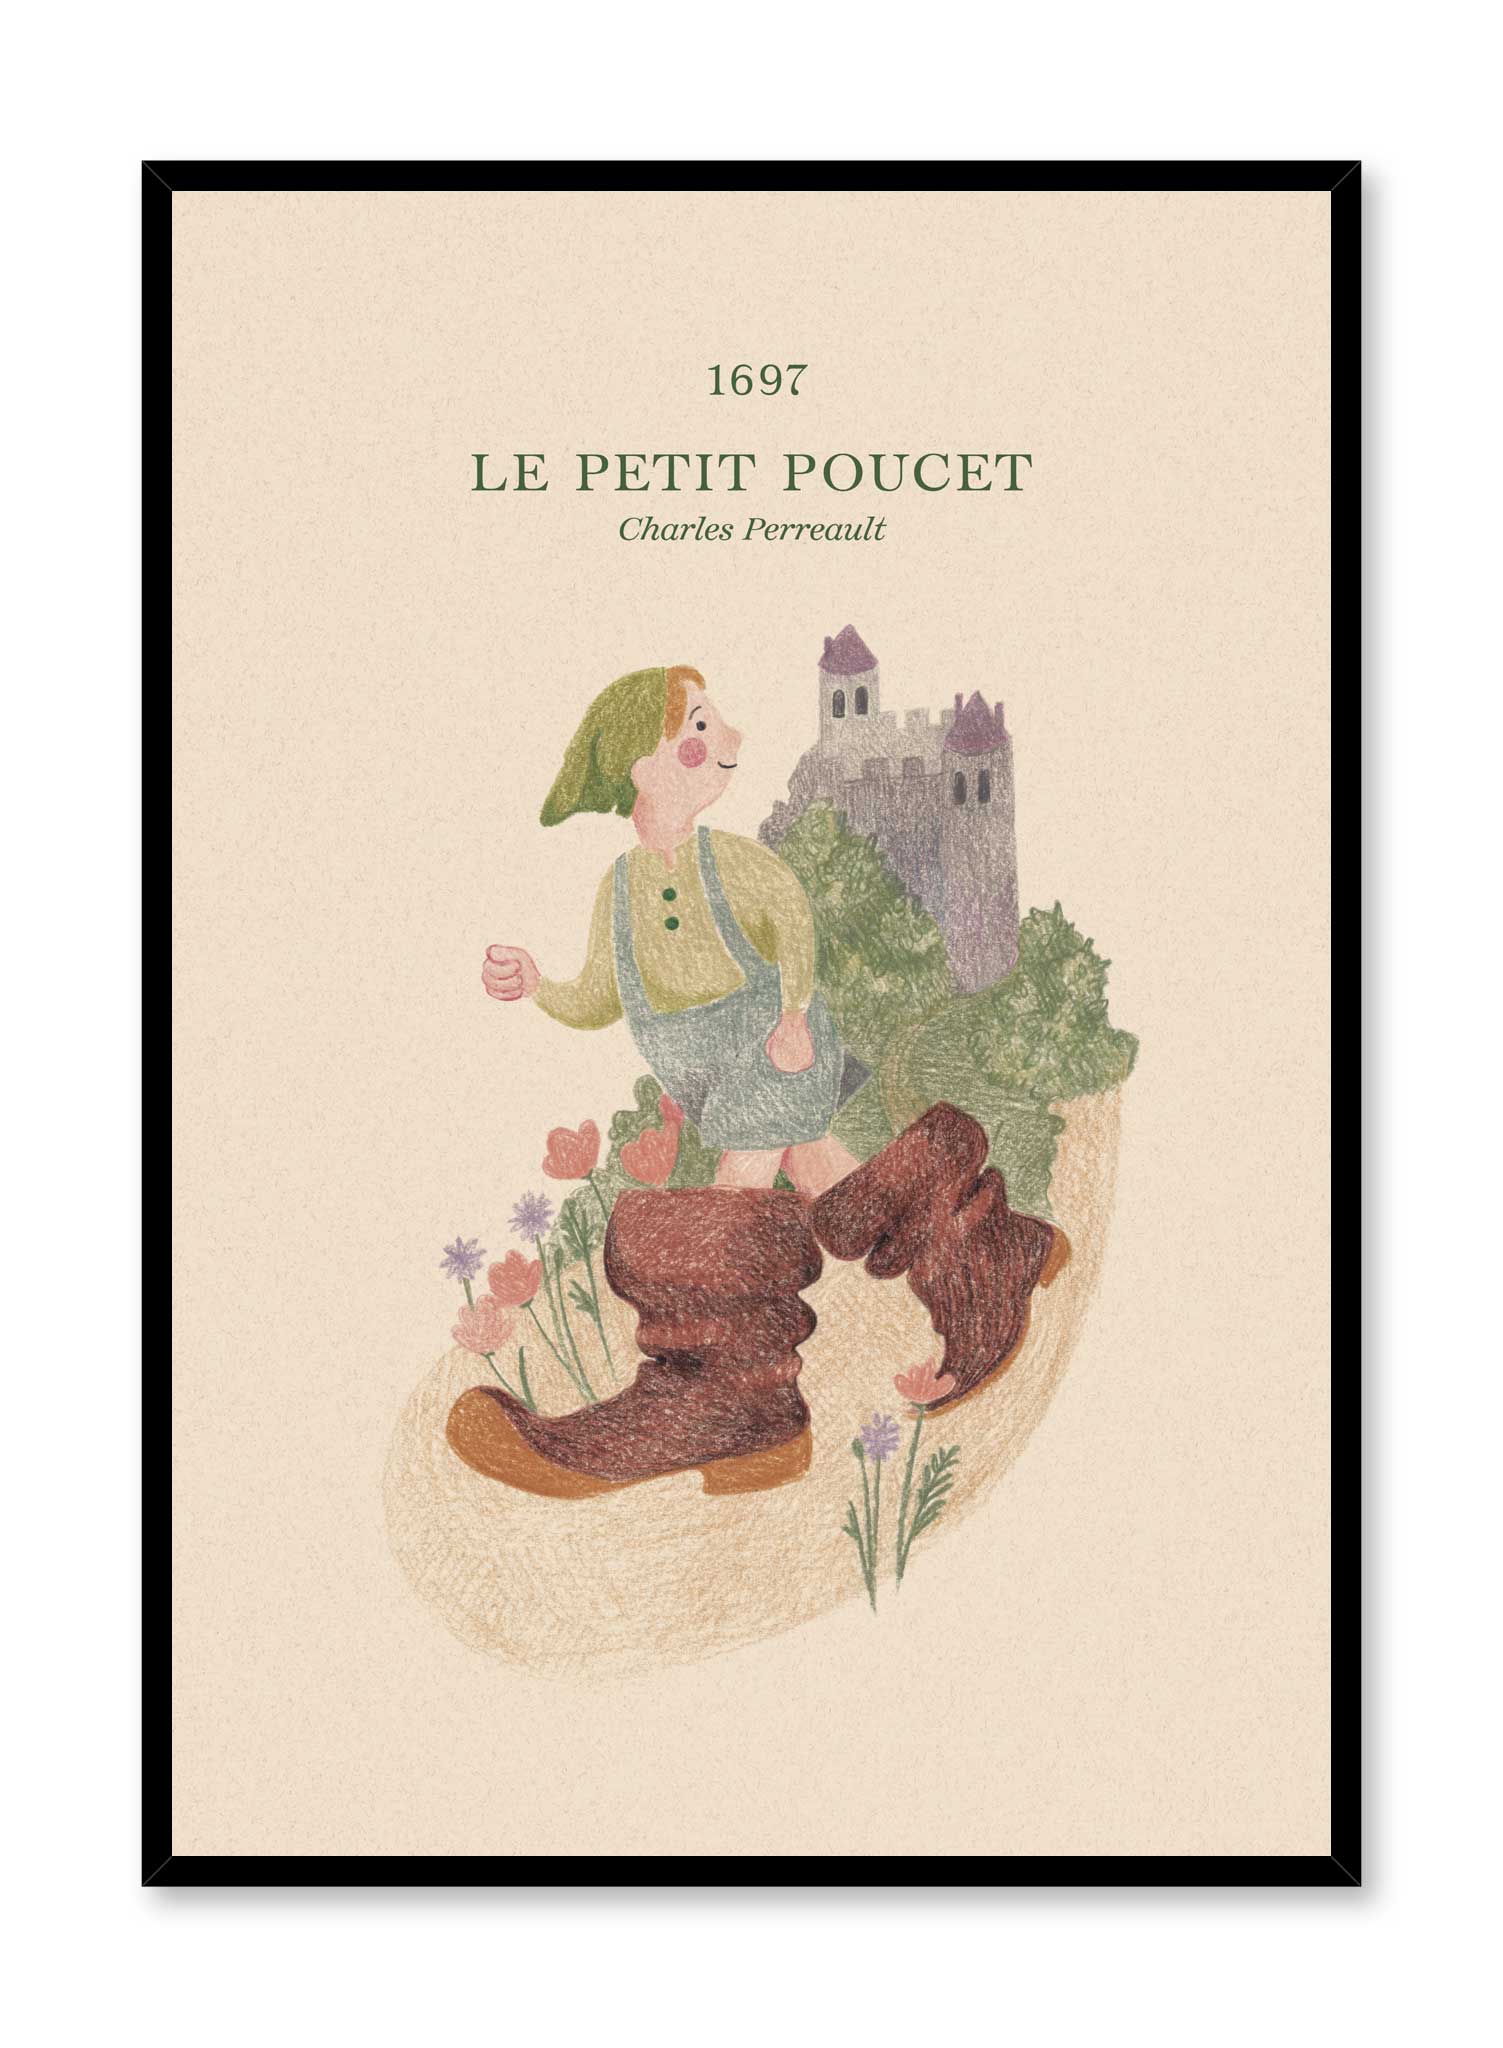 Little Thumb is a minimalist illustration by Opposite Wall of Charles Perrault's Little Thumb where the little boy is seen walking away wearing enormous boots.